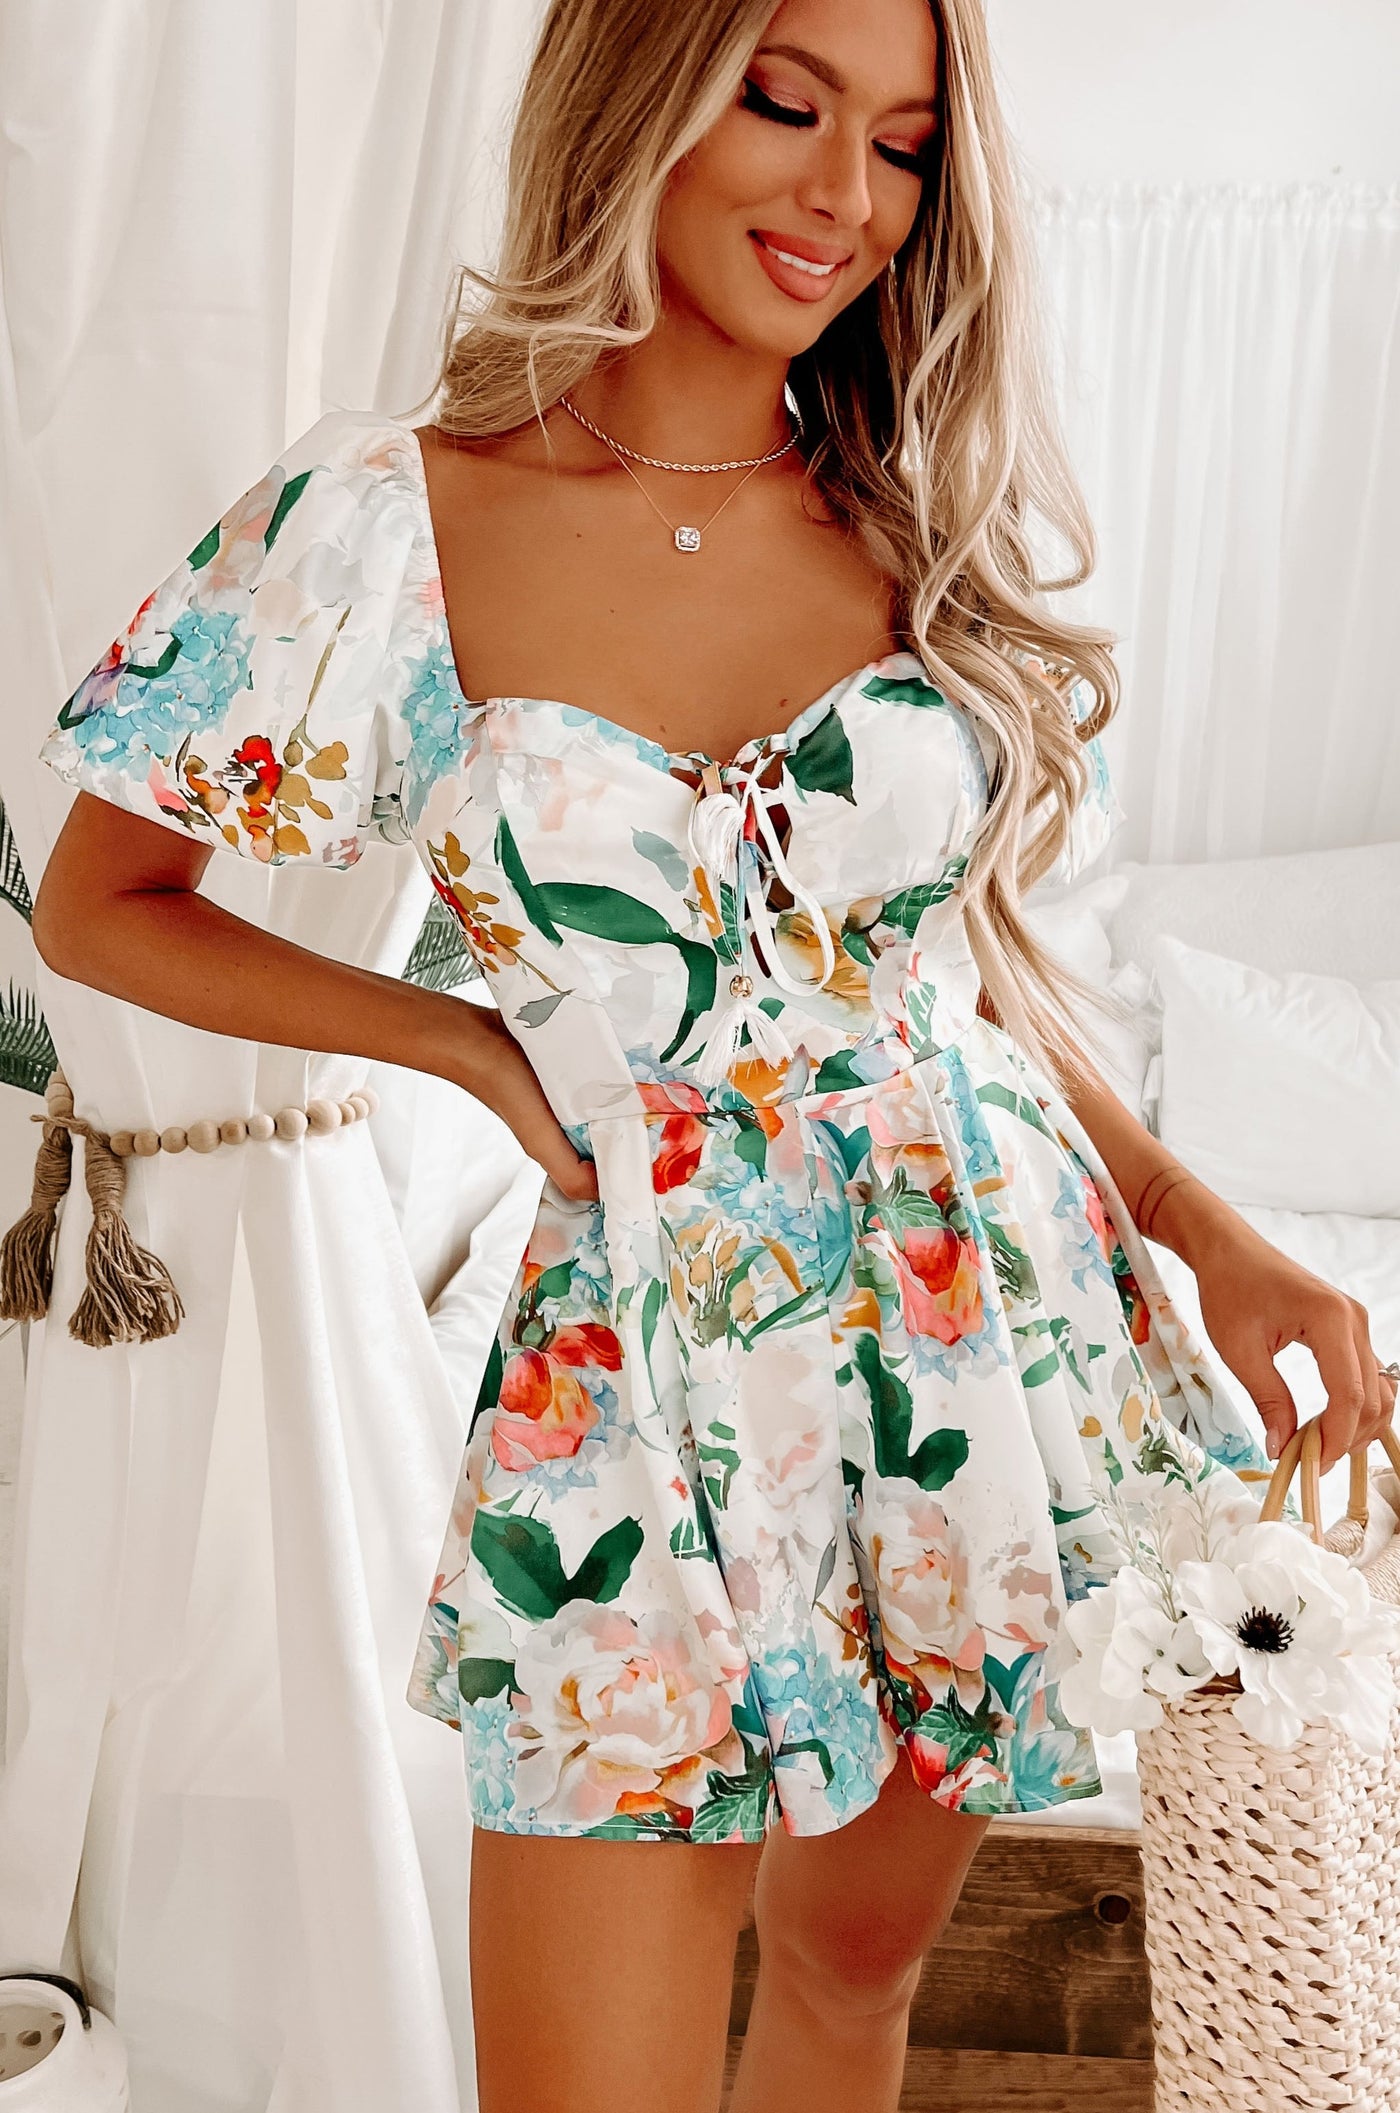 Adoring Looks Floral Printed Lace-Up Romper (White/Green Multi) - NanaMacs